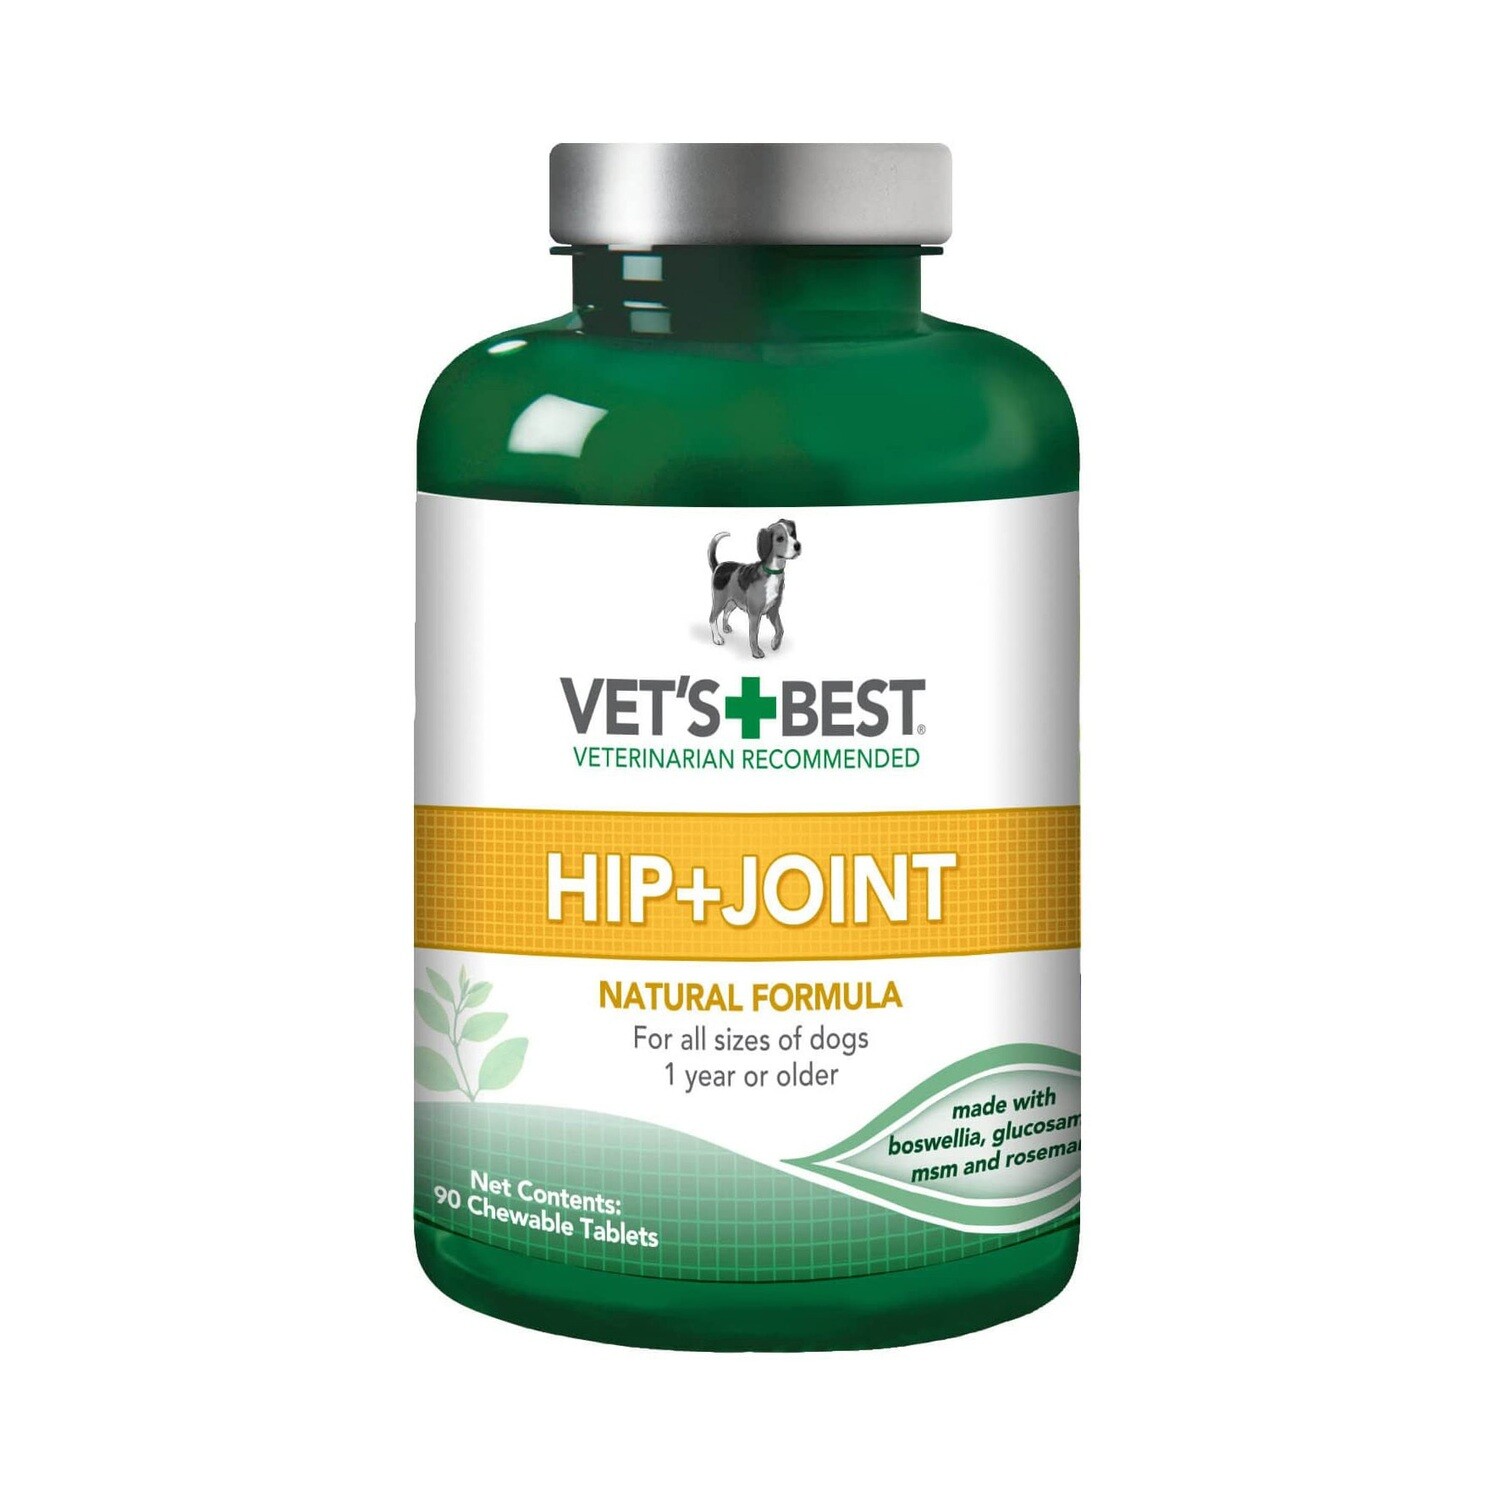 VETS BEST LEVEL 1 FIRST STEP HIP AND JOINT SUPPLEMENTS FOR DOG - 绿十字关节保健补充片 犬用